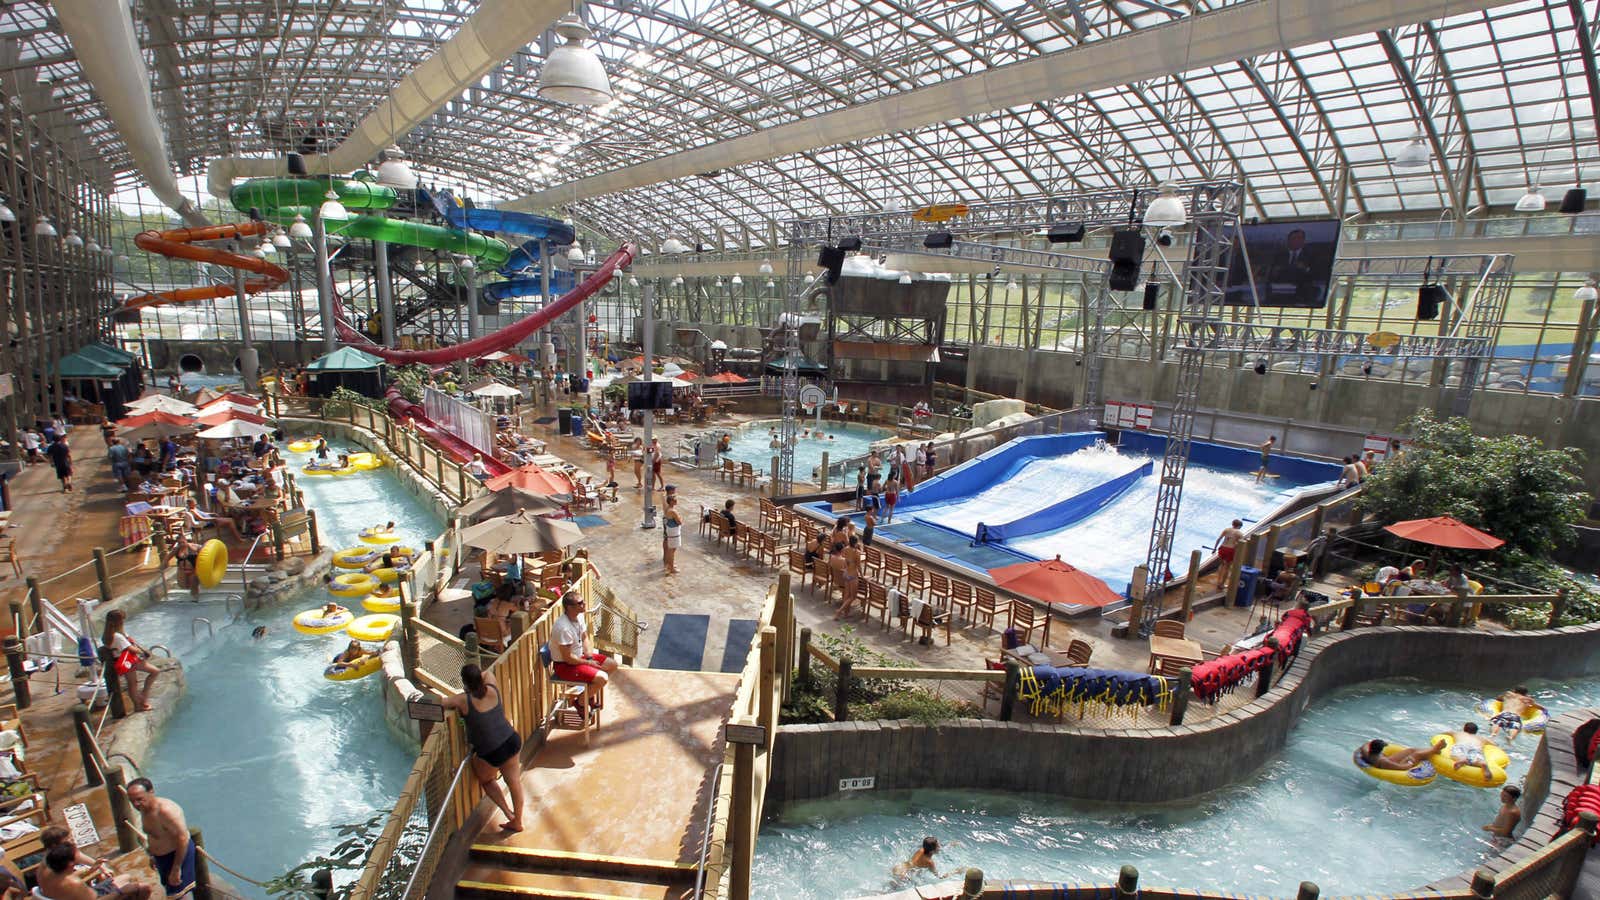 This Vermont water park was funded with EB-5 loans.